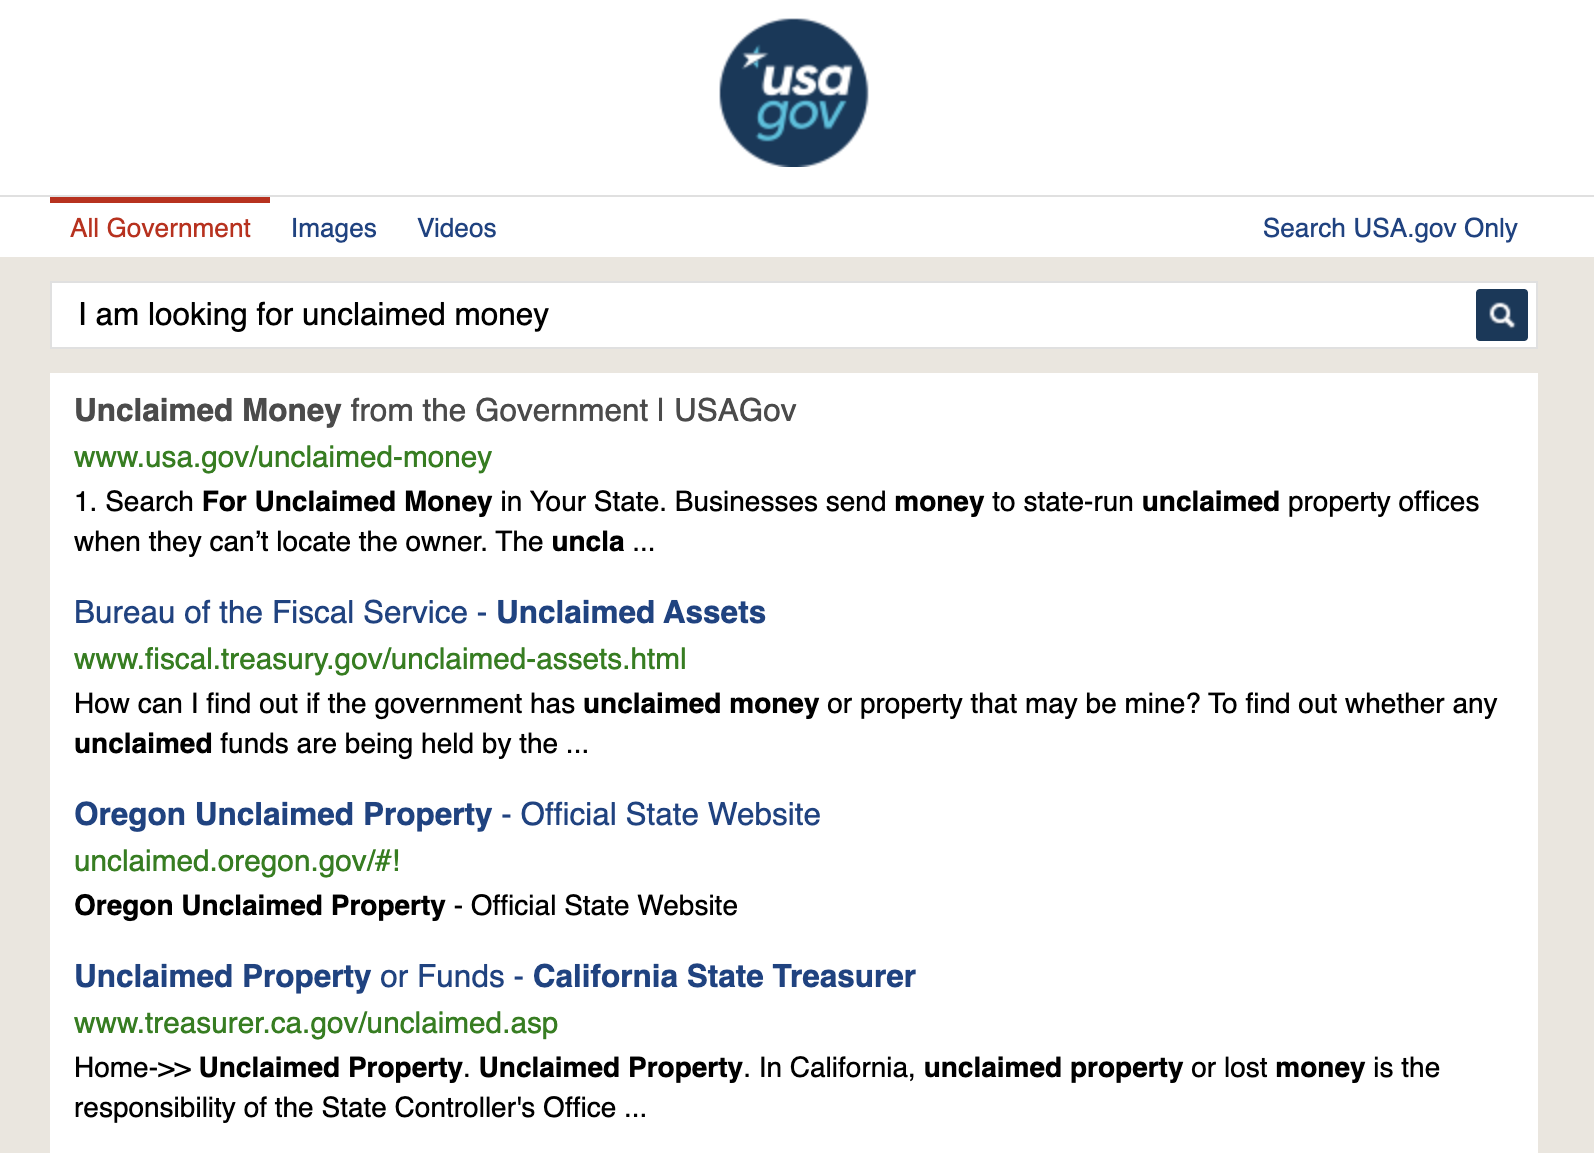 Standard search results for 'I am looking for unclaimed money' on USA.gov